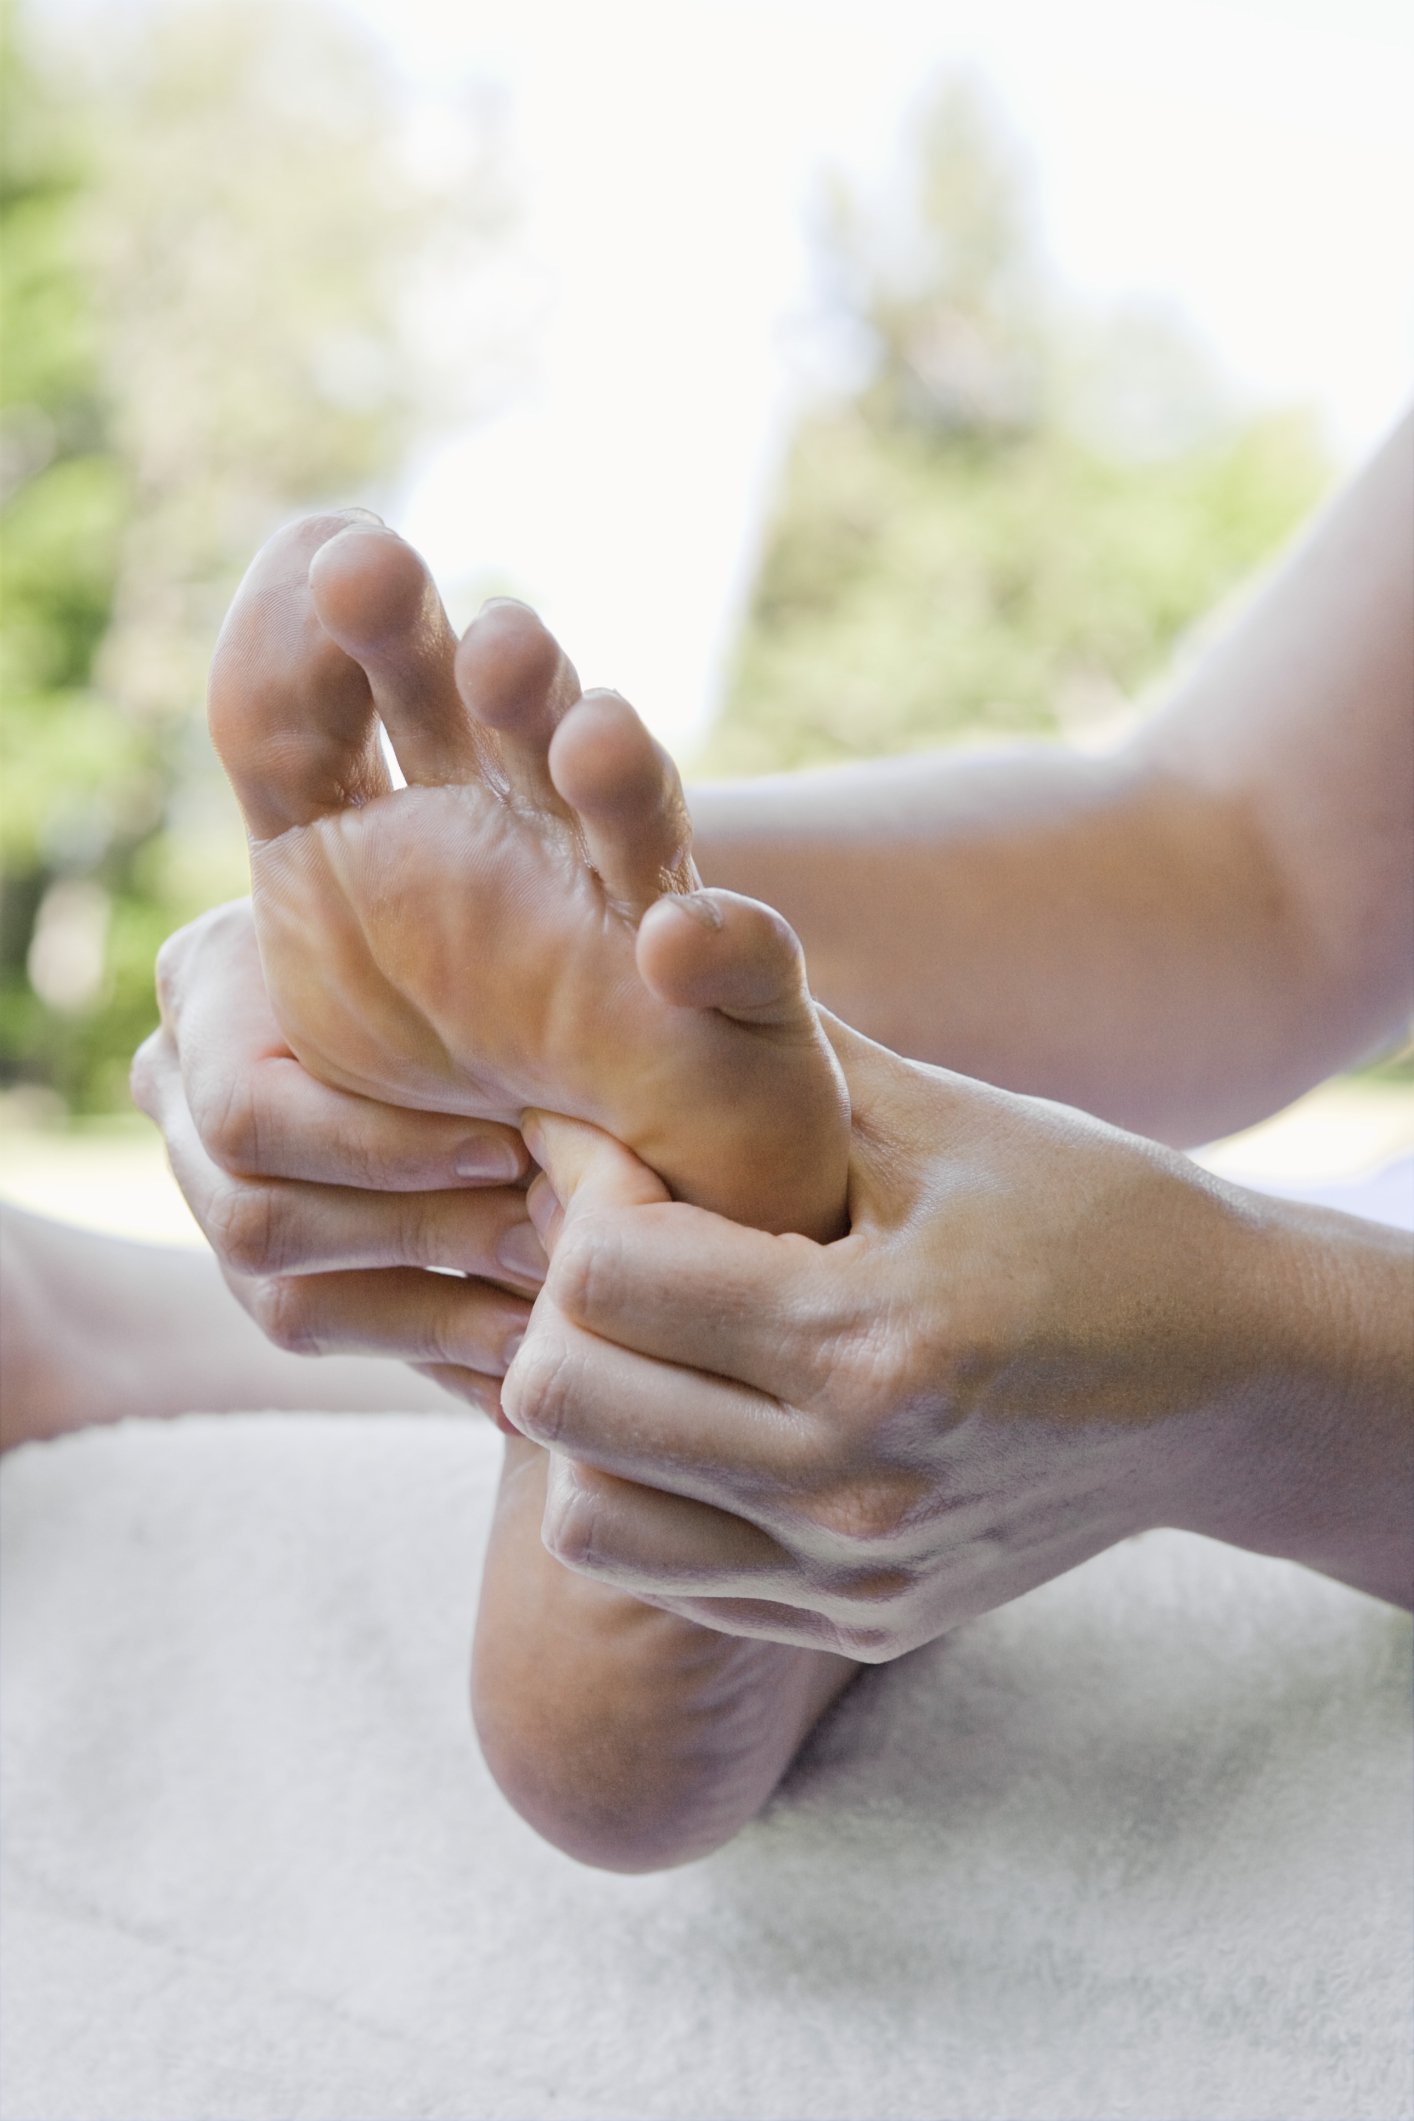 How to Get Rid of Foot Cramping